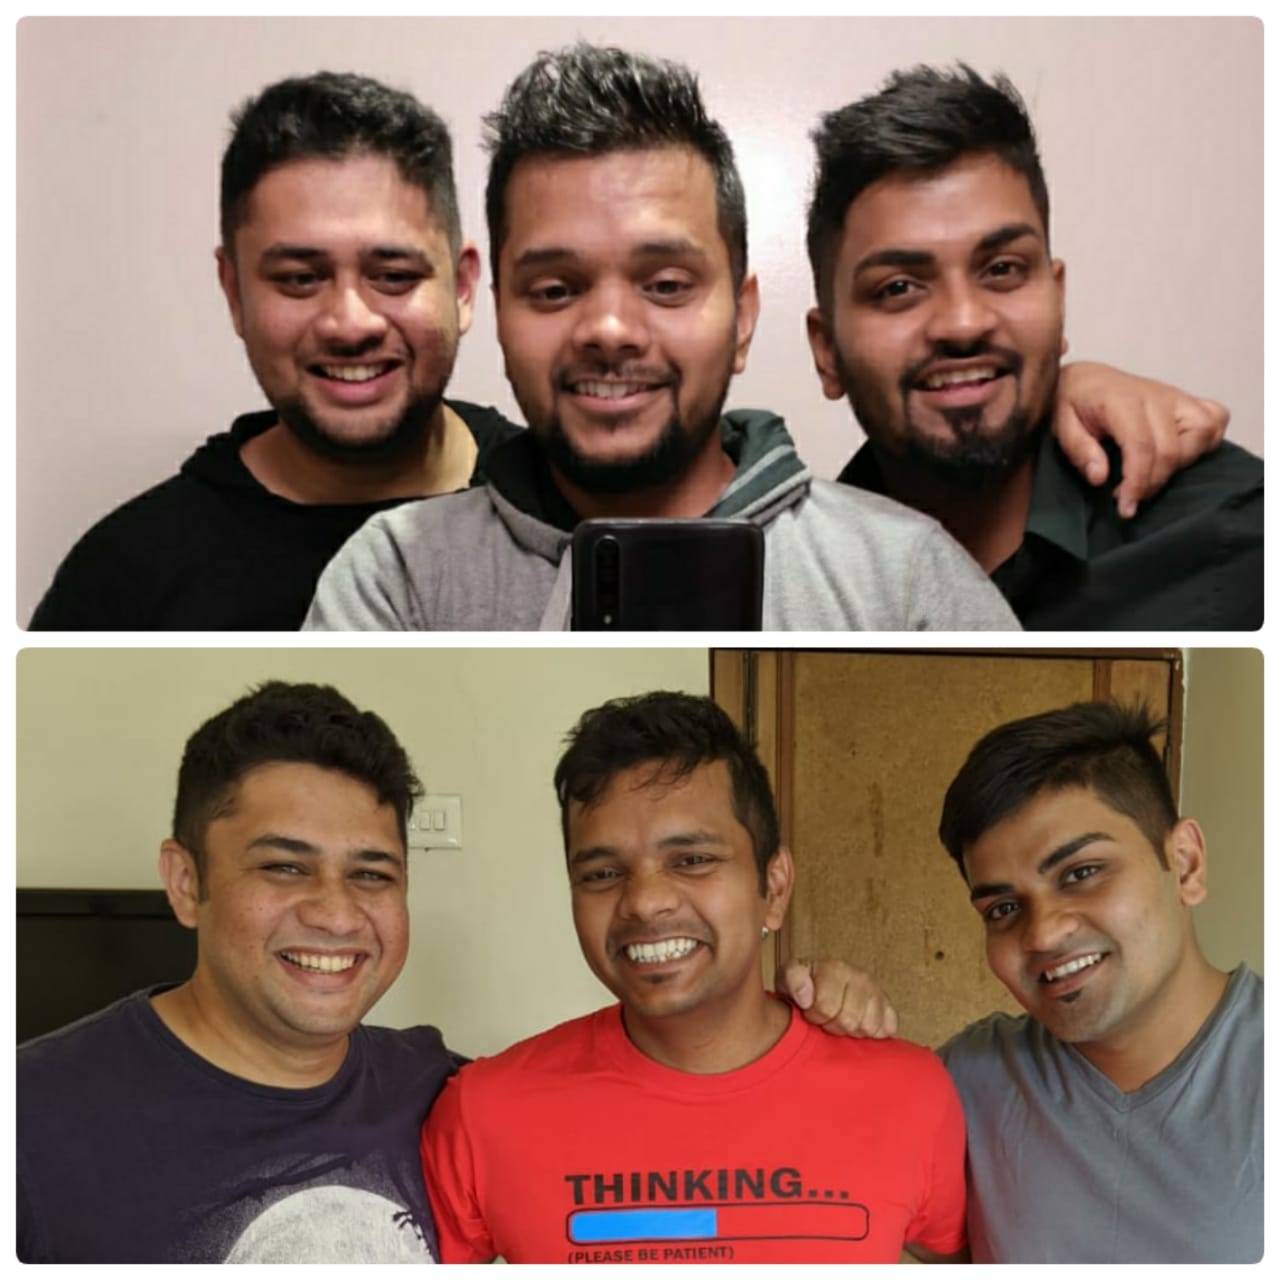 From Clean Shaving Facial Hair To Going Bald Men Take Up Clean Shave Challenge During The Lockdown Times Of India